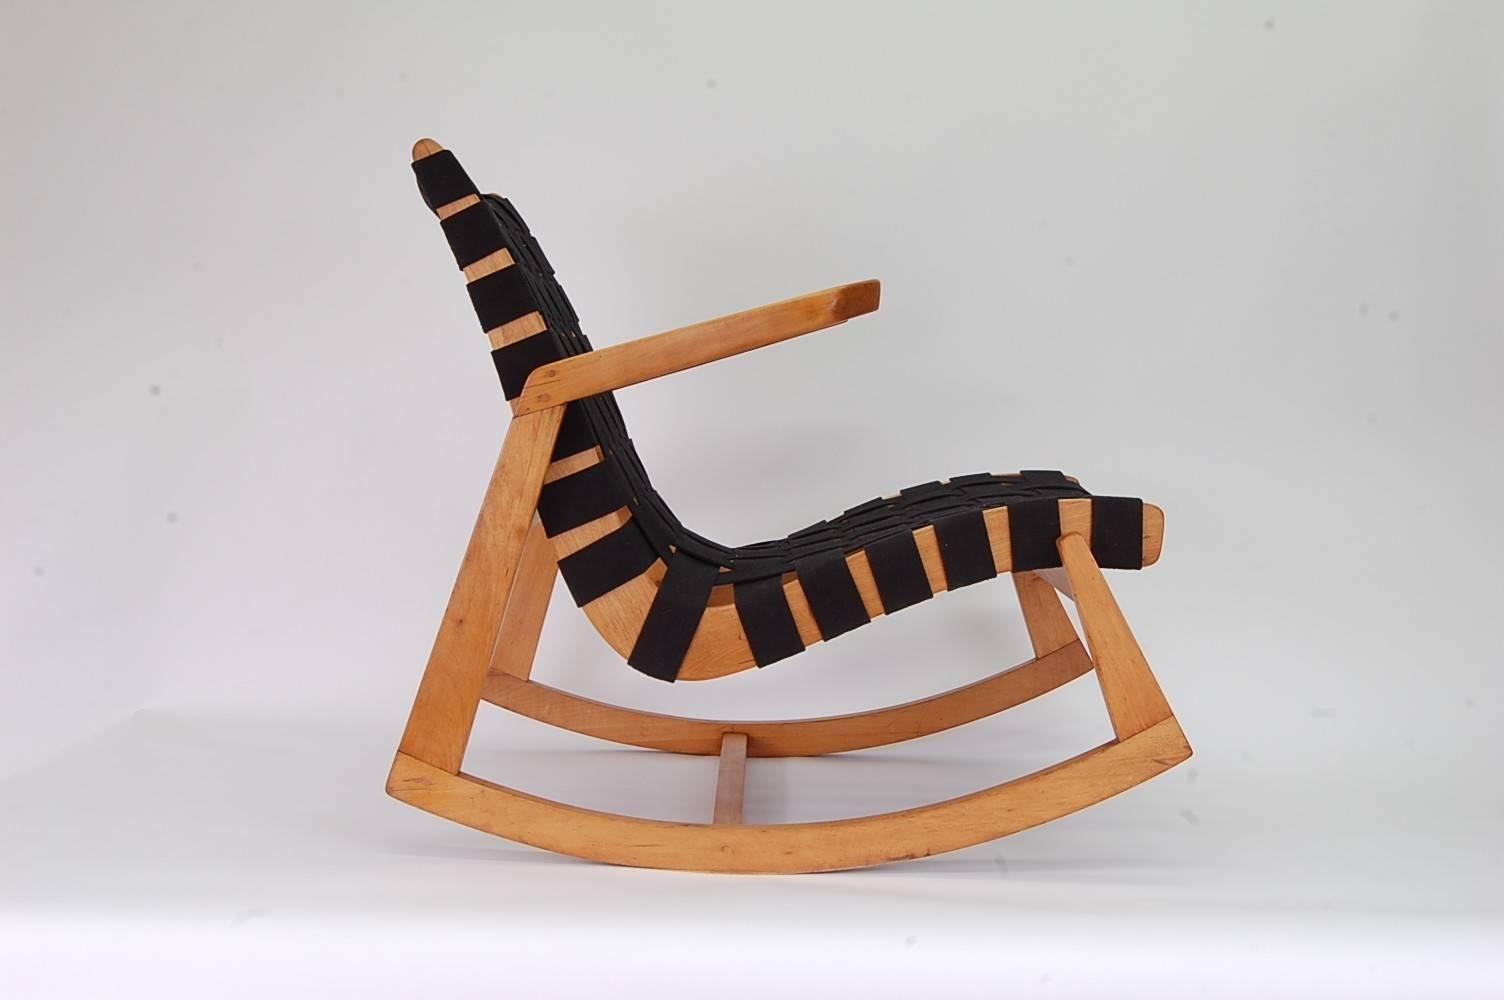 Rare rocking chair designed by Ralph Rapson (1914-2008) and manufactured by Knoll in 1945. Very rare, as it was only in production for one year. Completely restored, including new black cotton webbing.

Rapson studied at Cranbrook and later taught